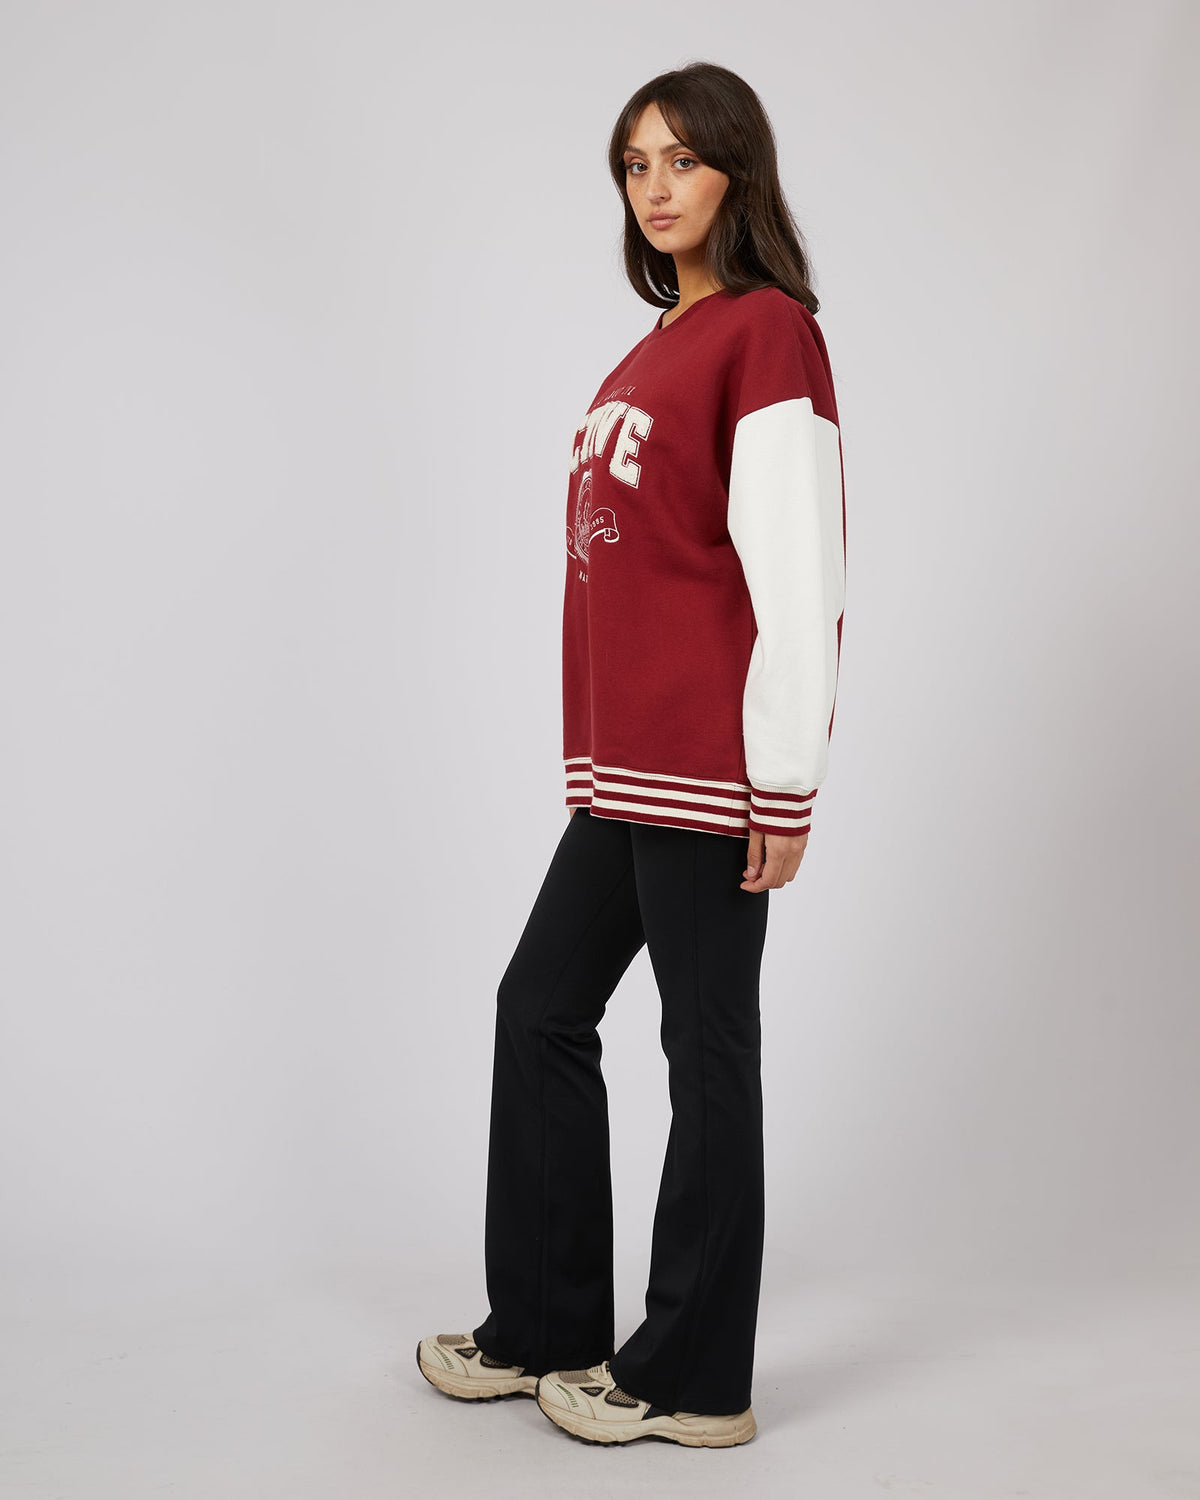 All About Eve-National Contrast Crew Port-Edge Clothing